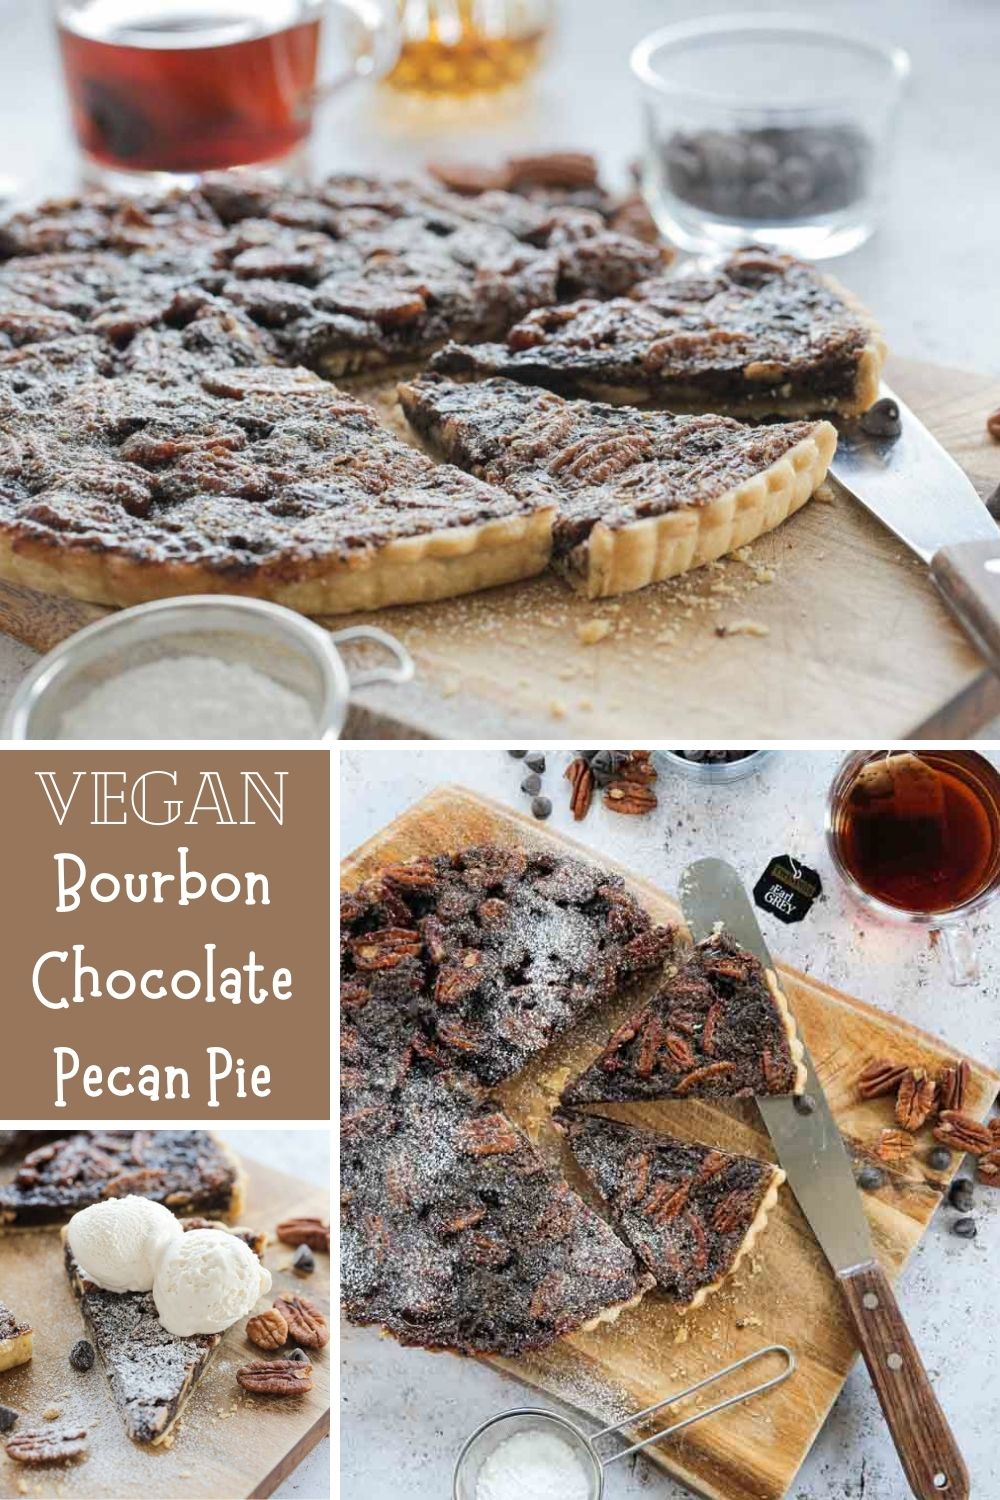 Sugary and buttery but not overly sweet this chocolate pecan pie is made with a dash of bourbon and a homemade pie crust. It's sticky, gooey, just as good cold as it is fresh from the oven and is a richly decadent end to any meal! Recipe on the cookandhim.com | #pecanpie #veganrecipes #vegandessert #chocolatepecanpie #bourbonrecipes #veganbaking #veganchocolate